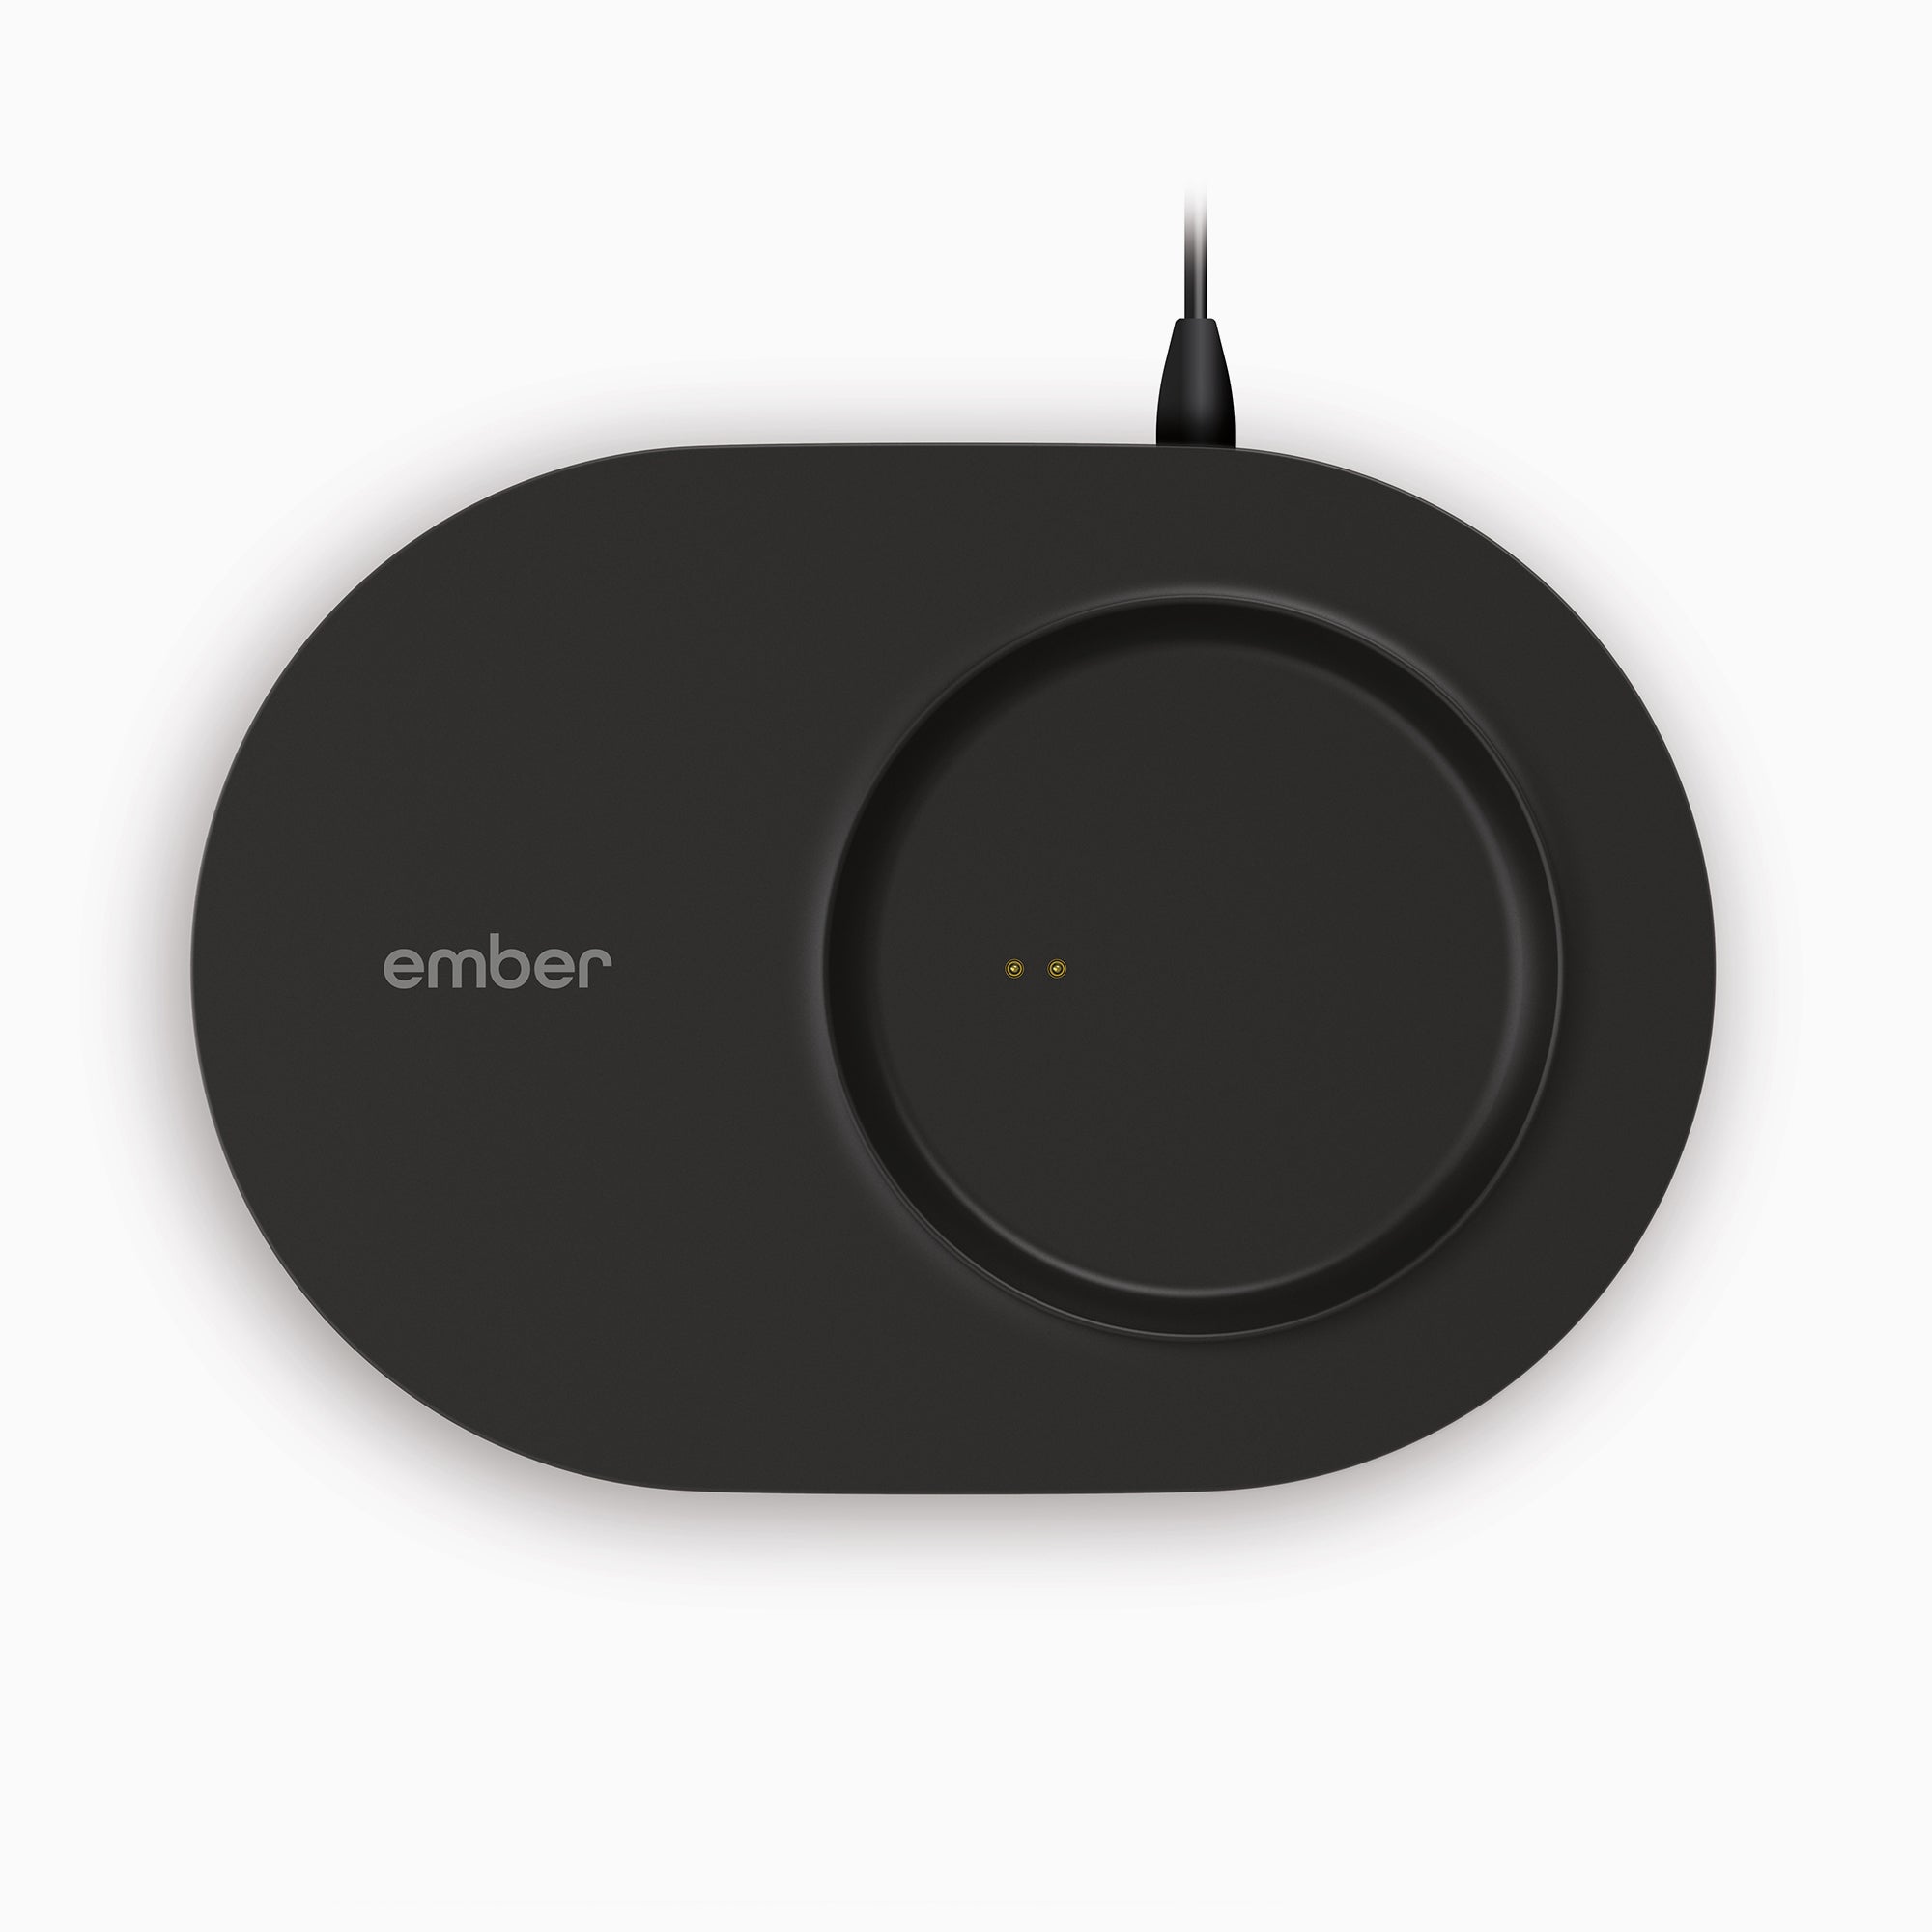 EMBER Travel Mug 2 After 6 Months? Have I Found A Replacement? 